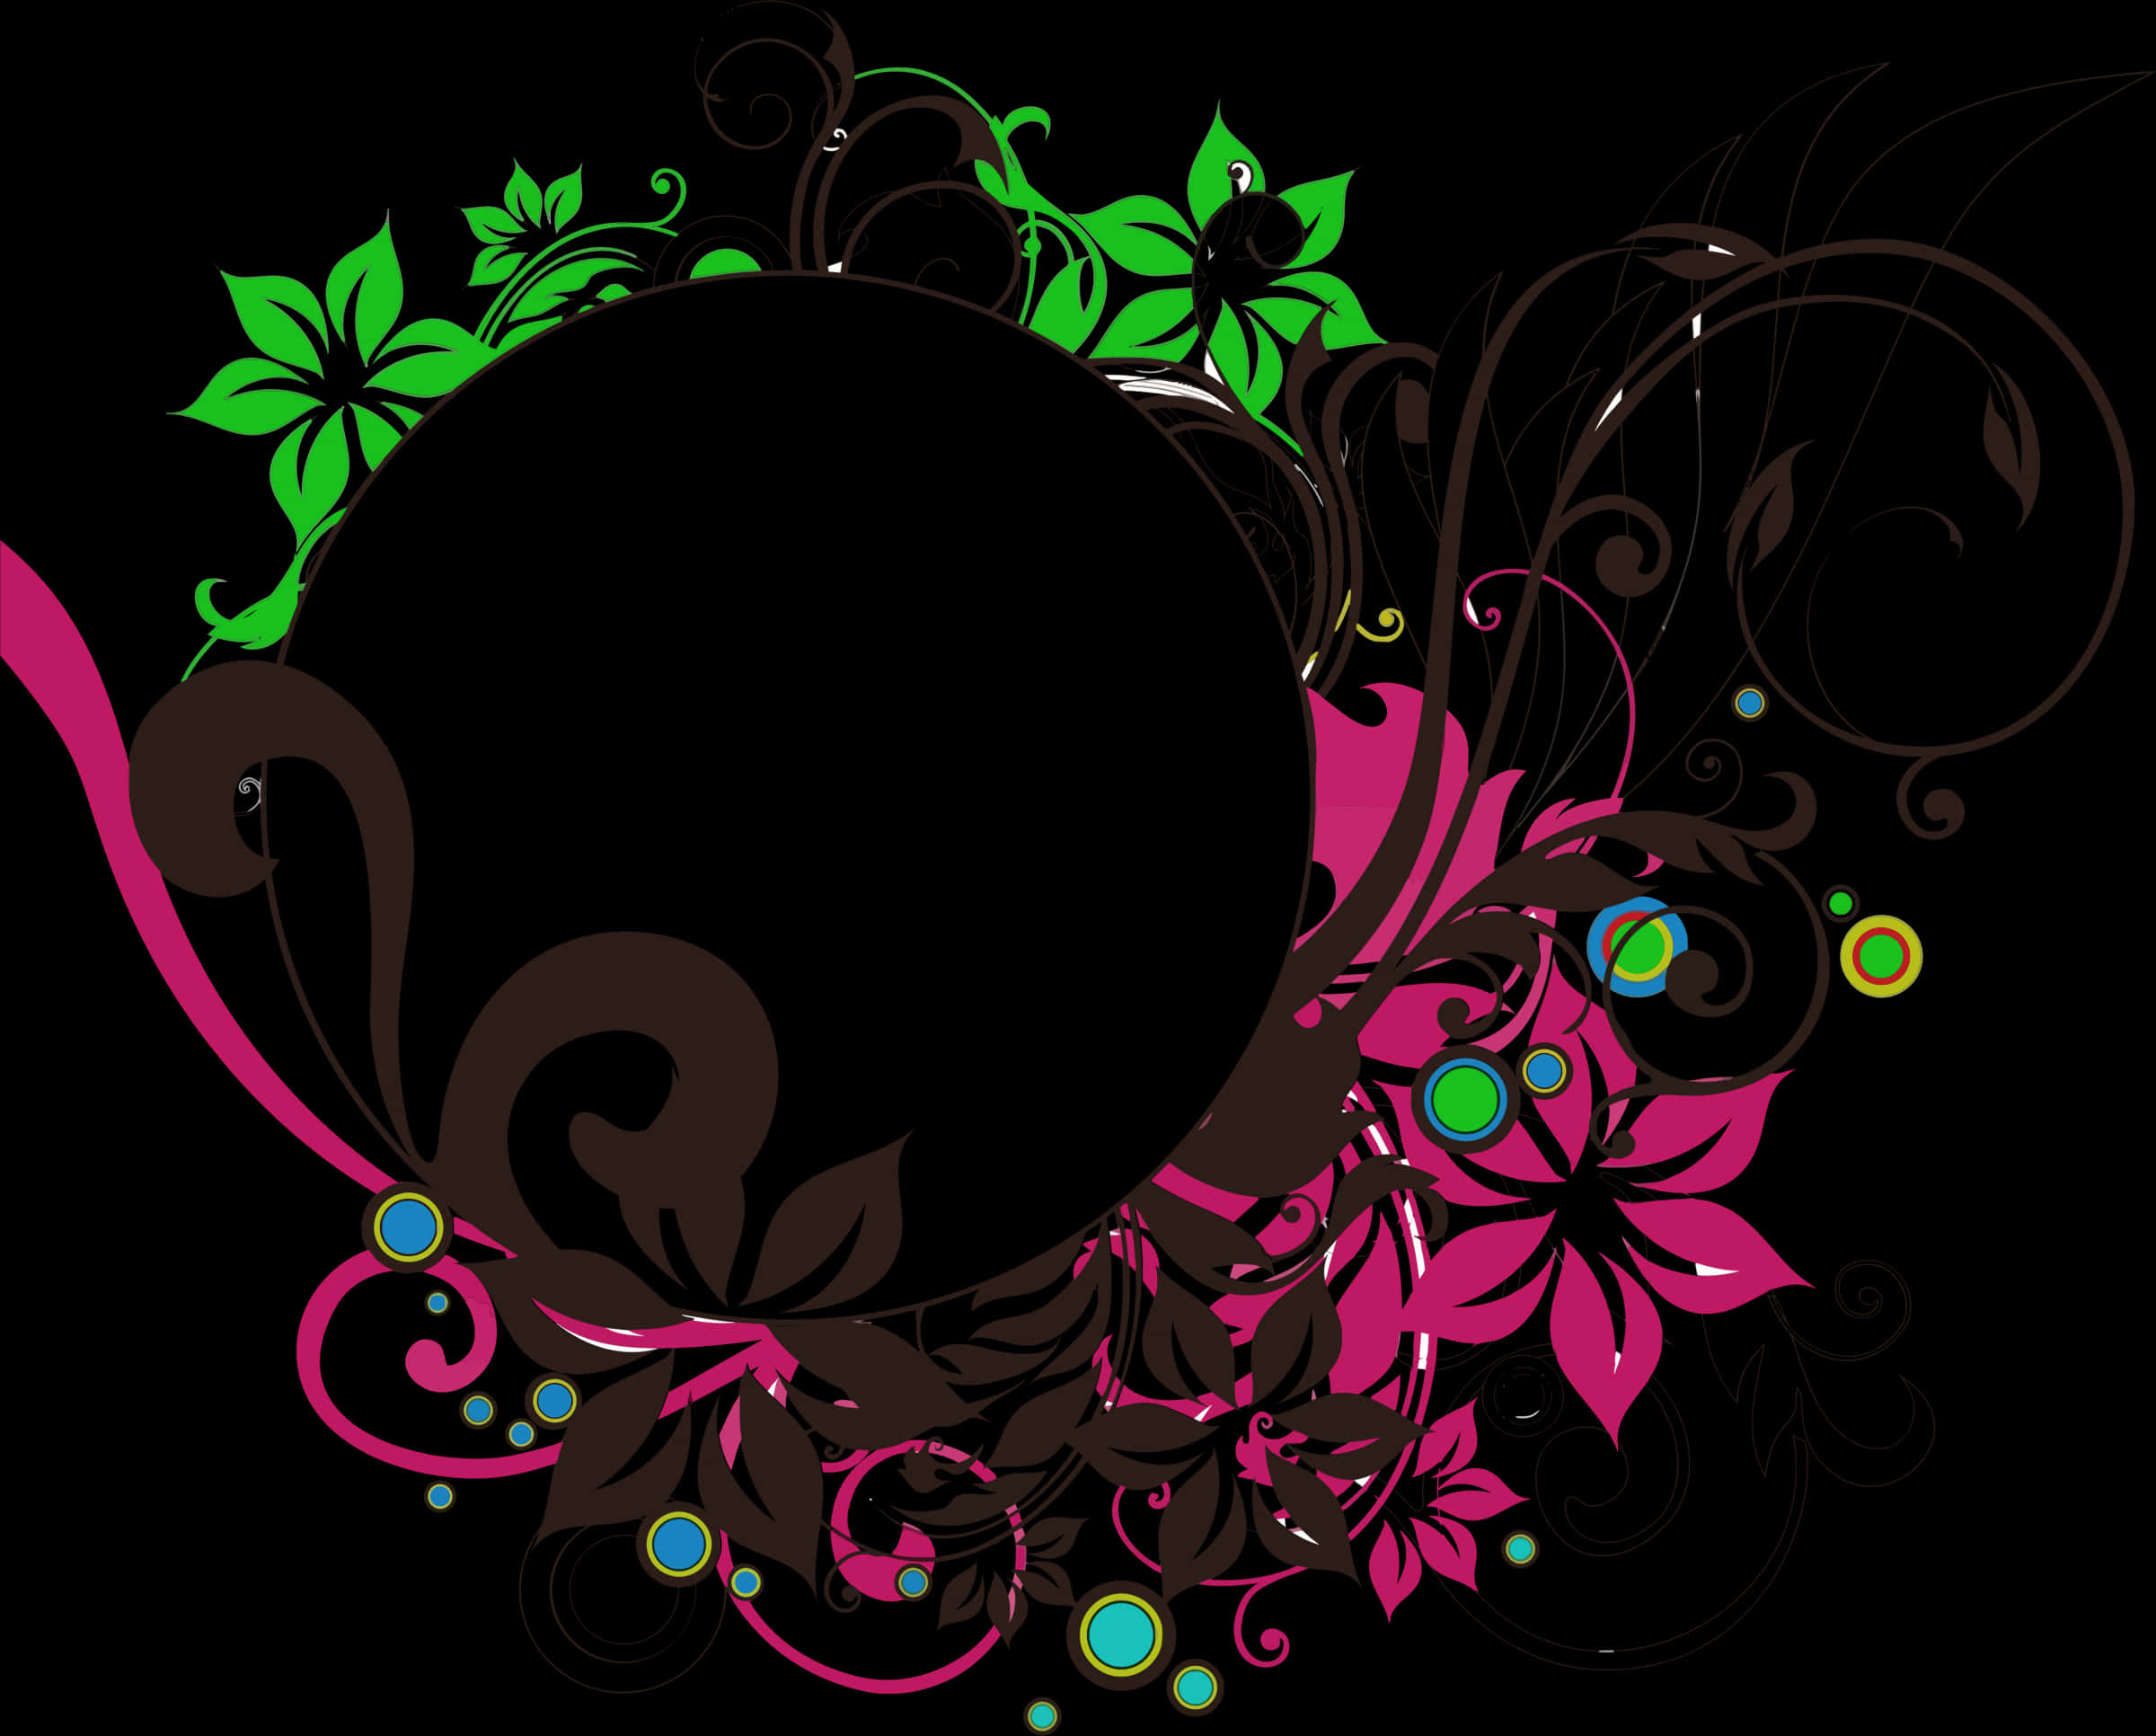 A Black Circle With Pink And Green Leaves